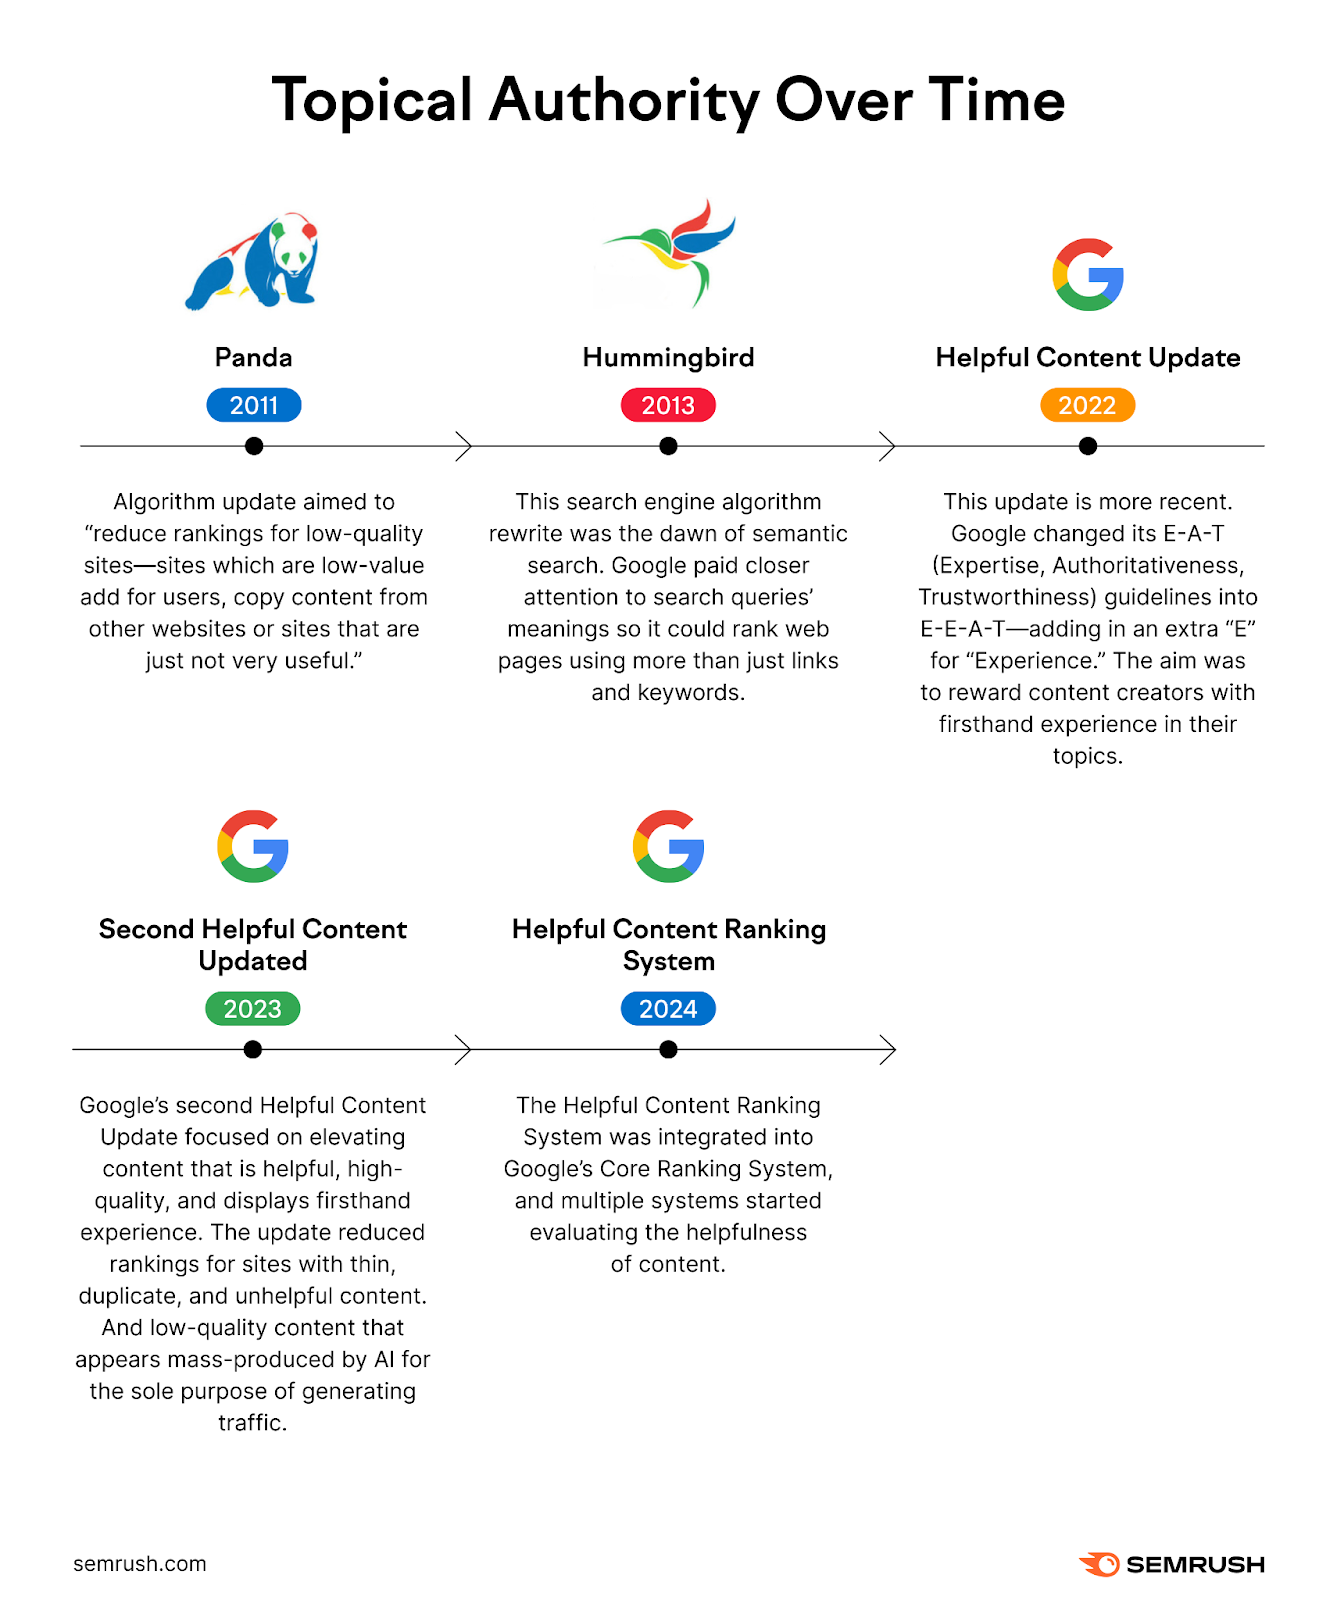 Timeline of Topical Authority over time with Google updates